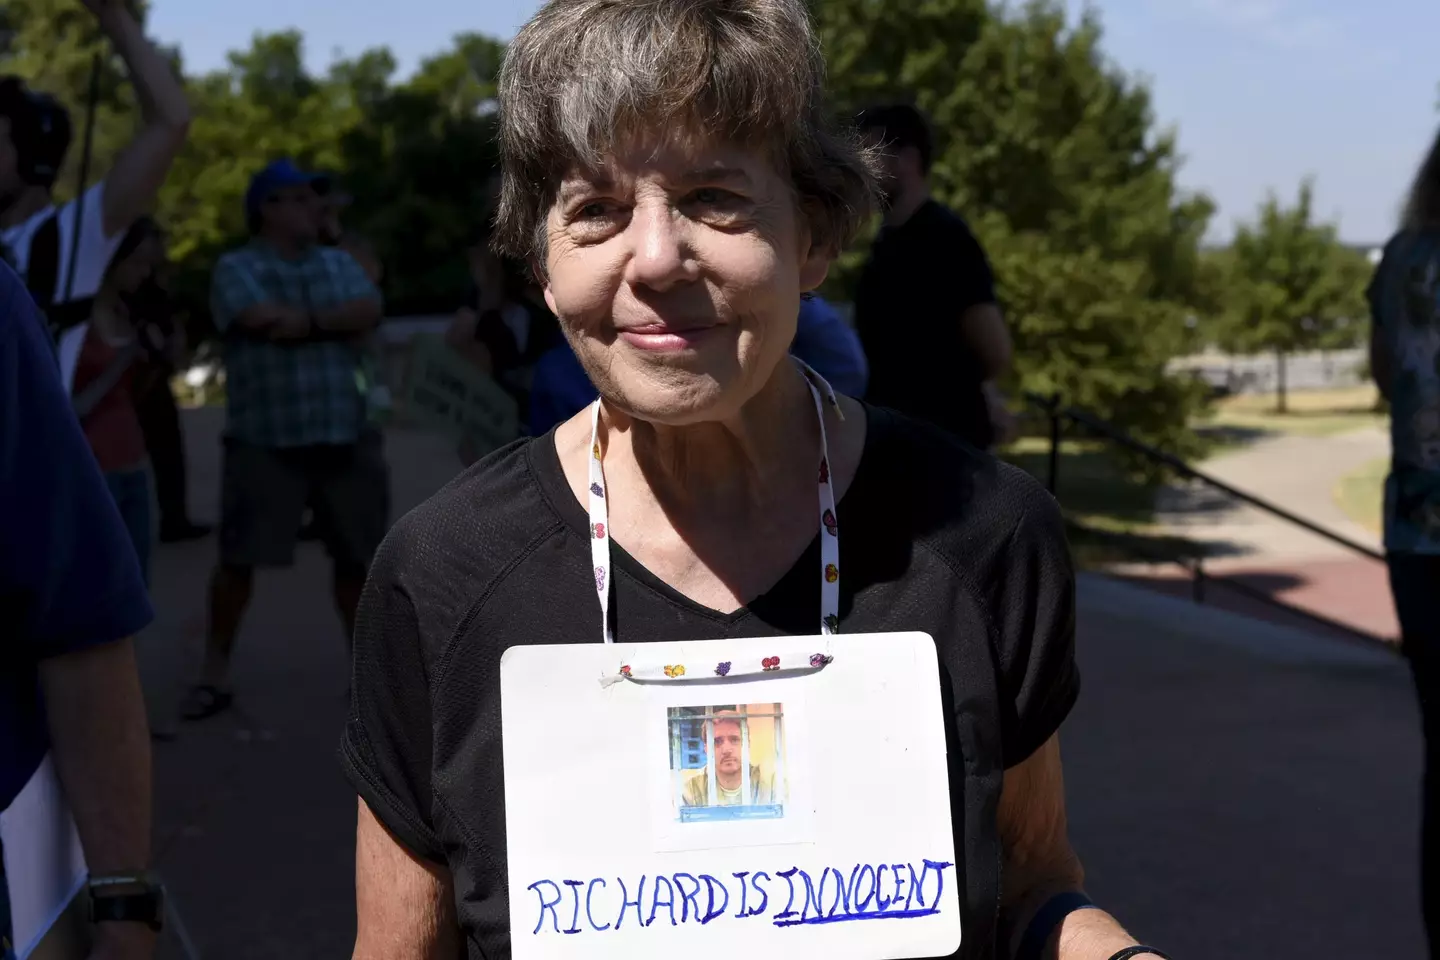 Anti-death penalty advocate Nancy Norvelle protests against scheduled execution of Glossip in Oklahoma City in September 2015.